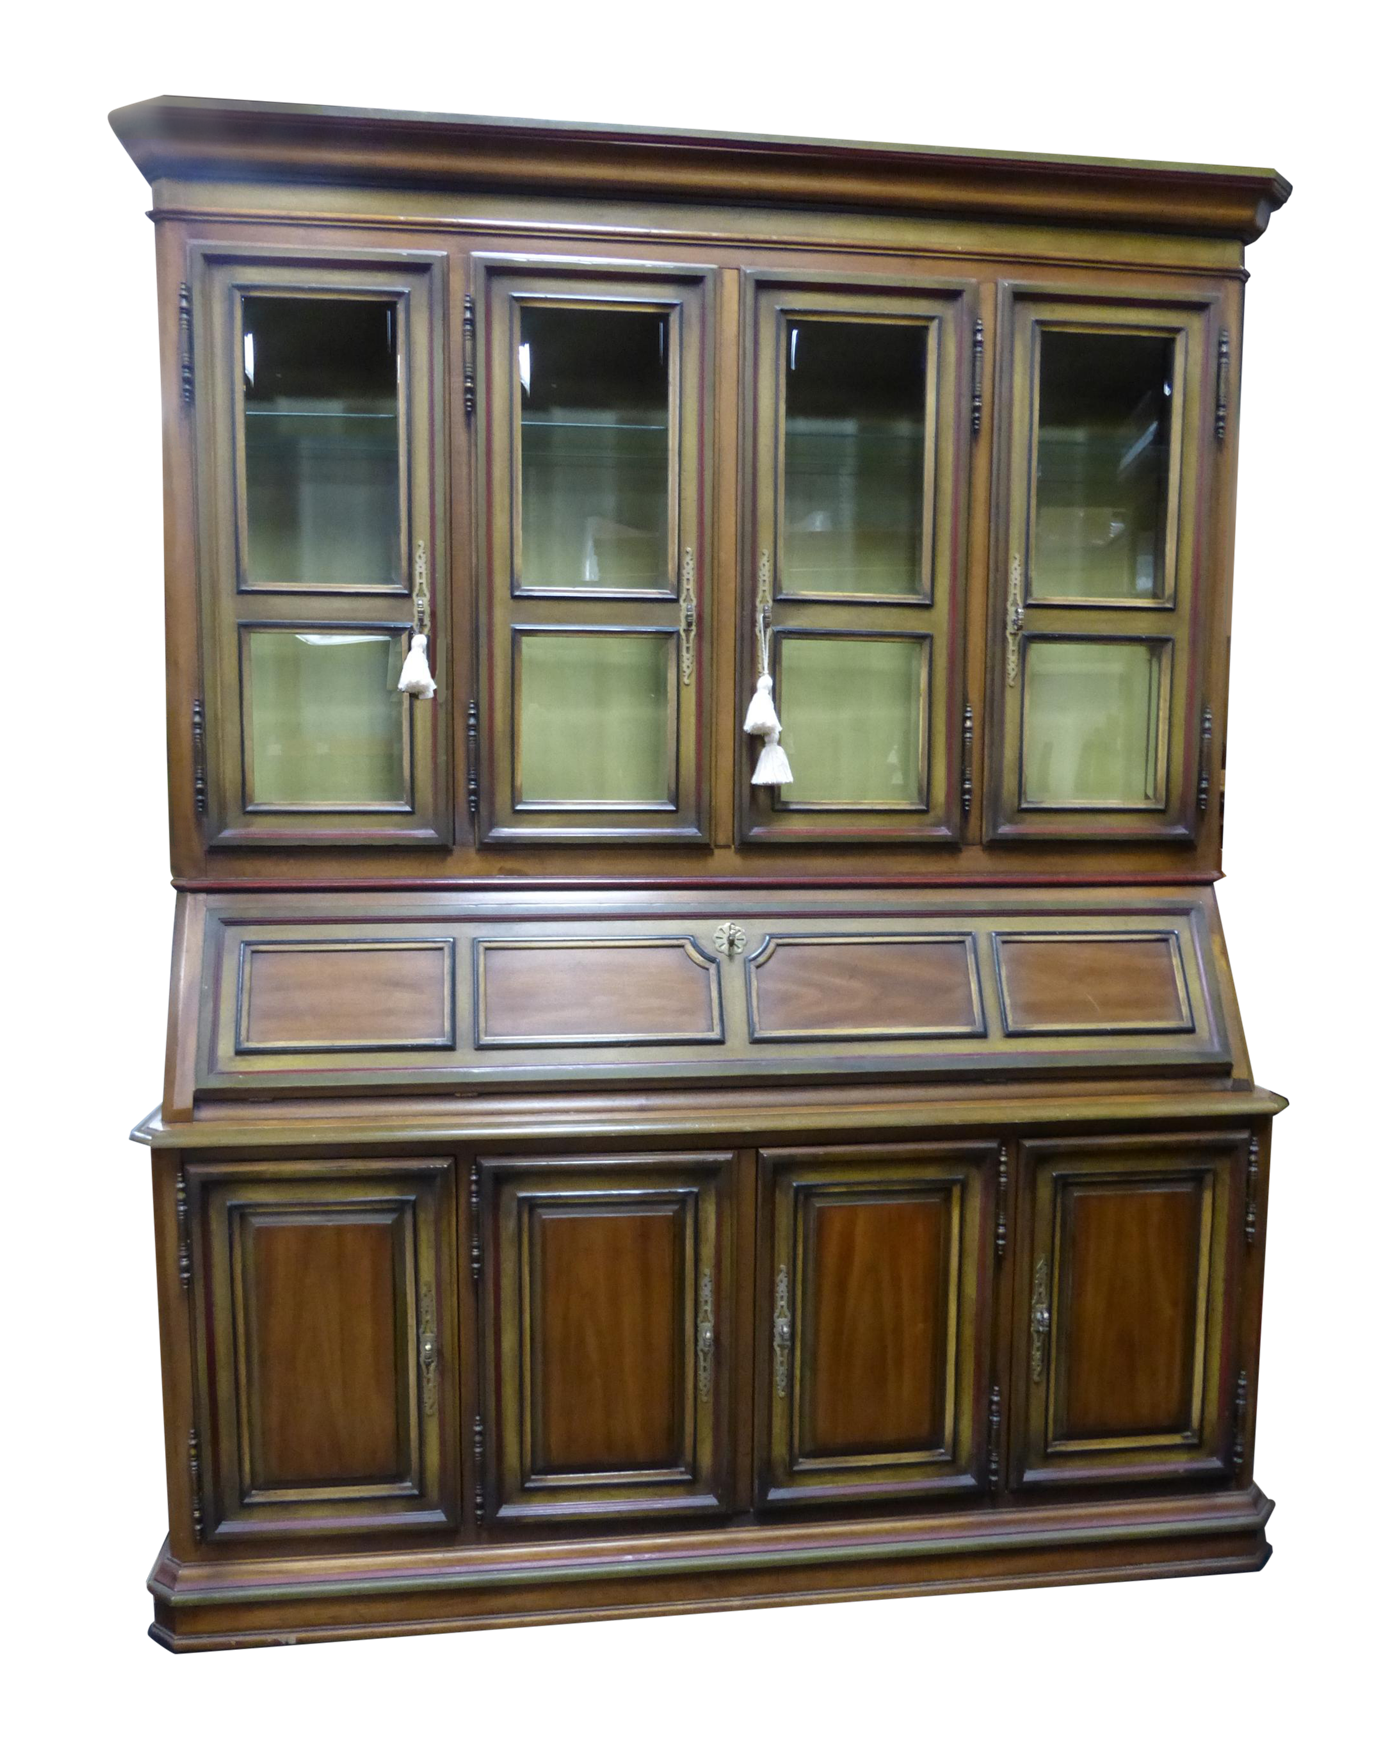 China Cabinet Image PNG Image High Quality PNG Image